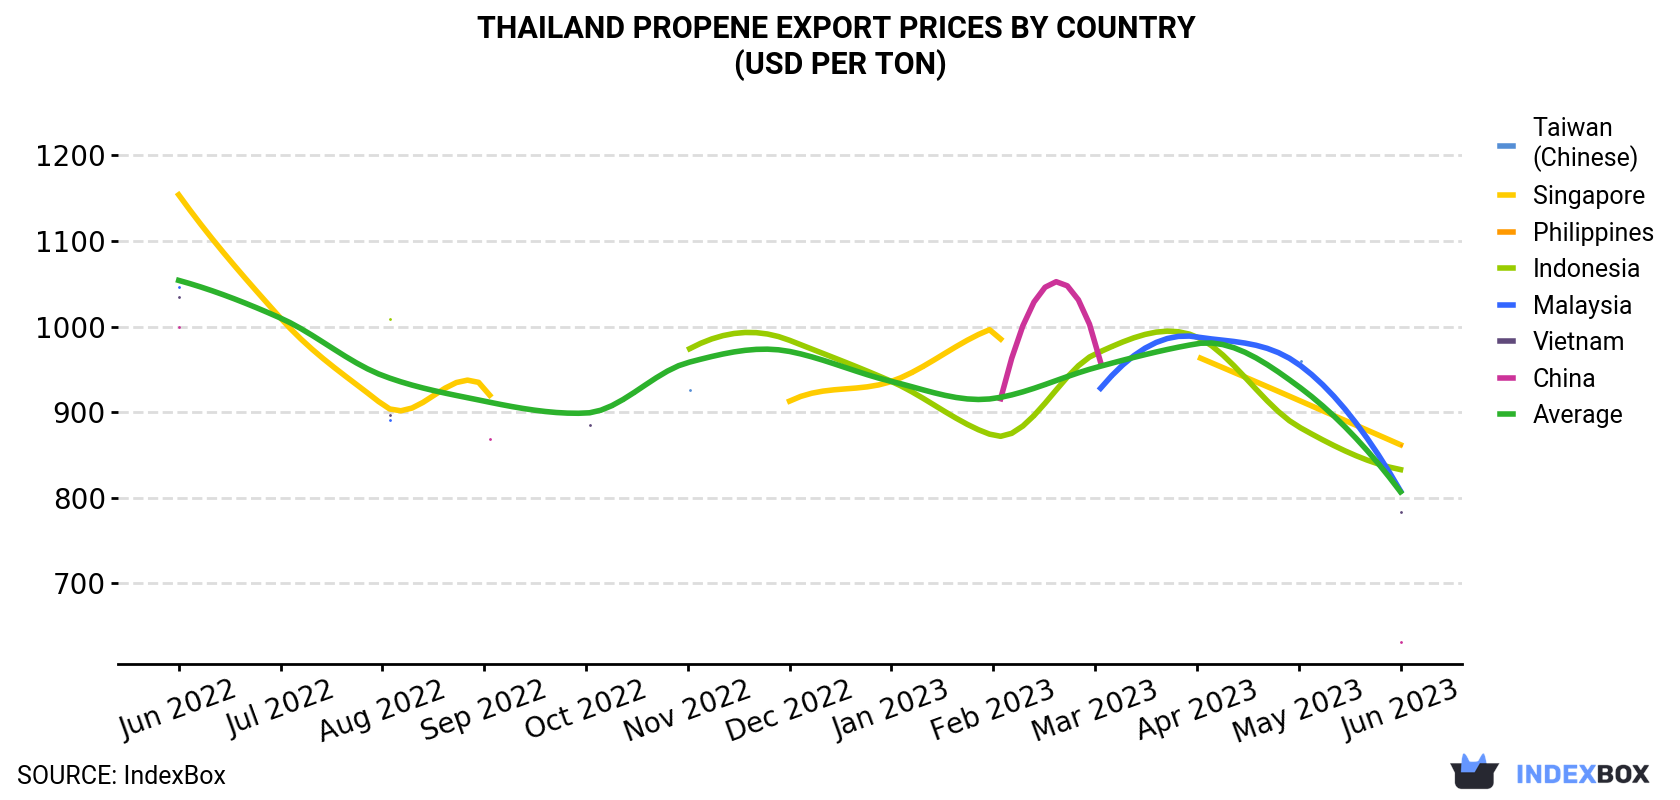 Thailand Propene Export Prices By Country (USD Per Ton)